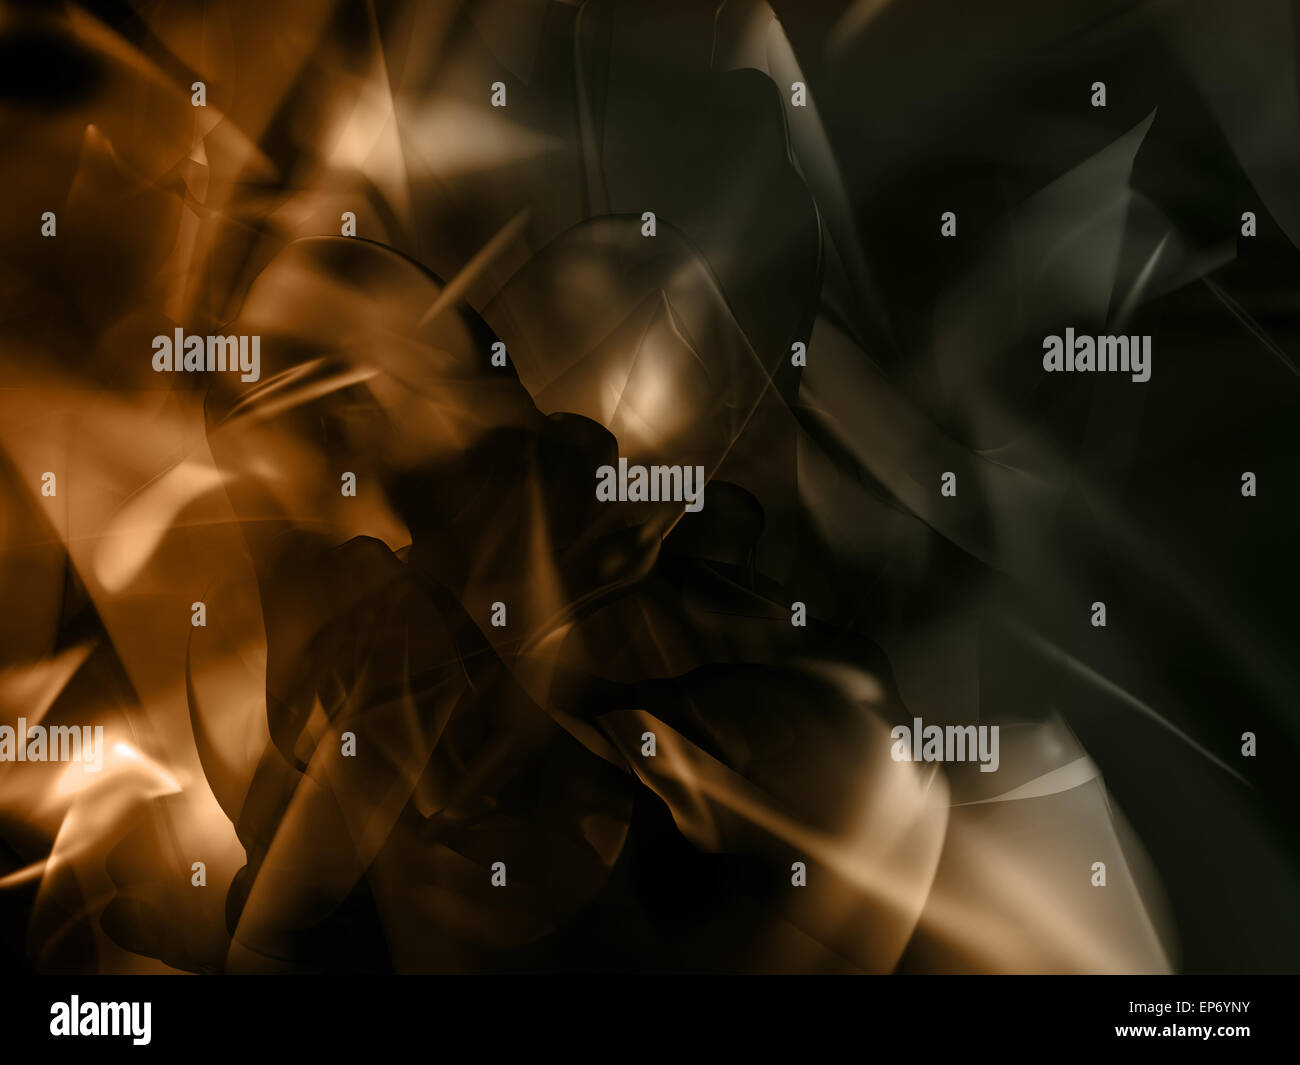 Blend art abstract background, digitally generated image. Stock Photo